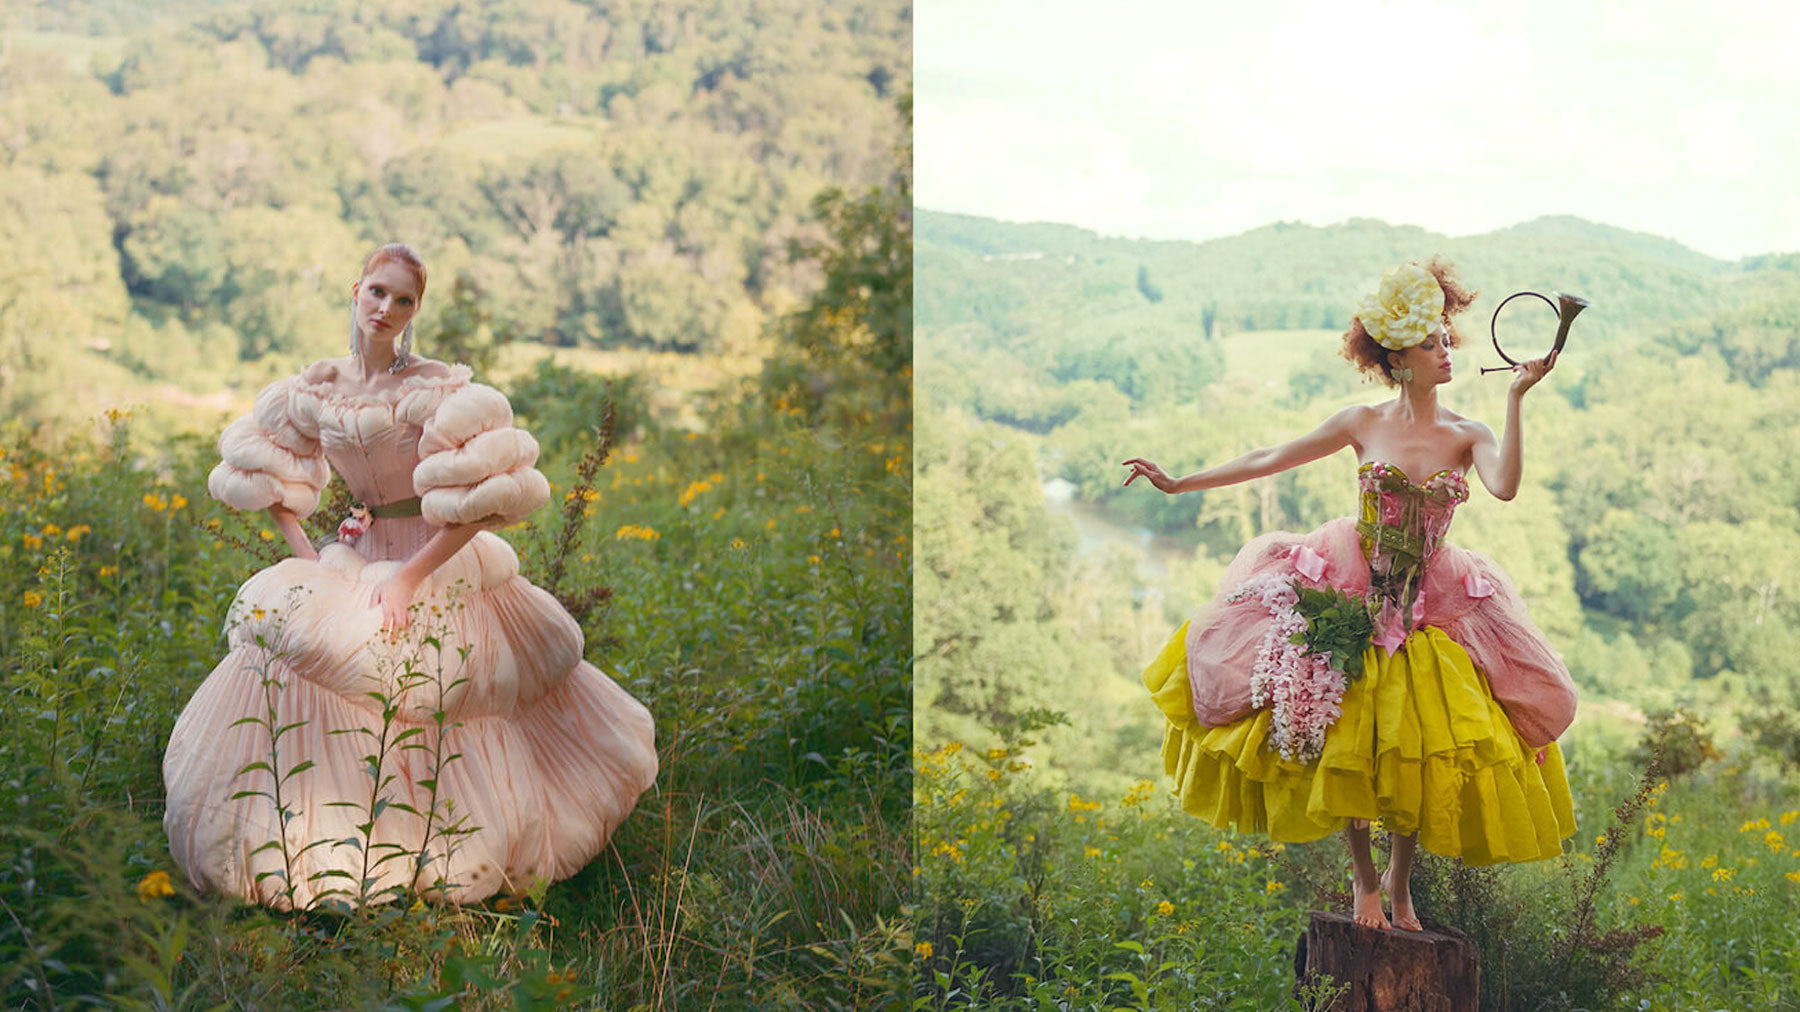 Springtime picnic in corsets, ruffled panties and ballgowns